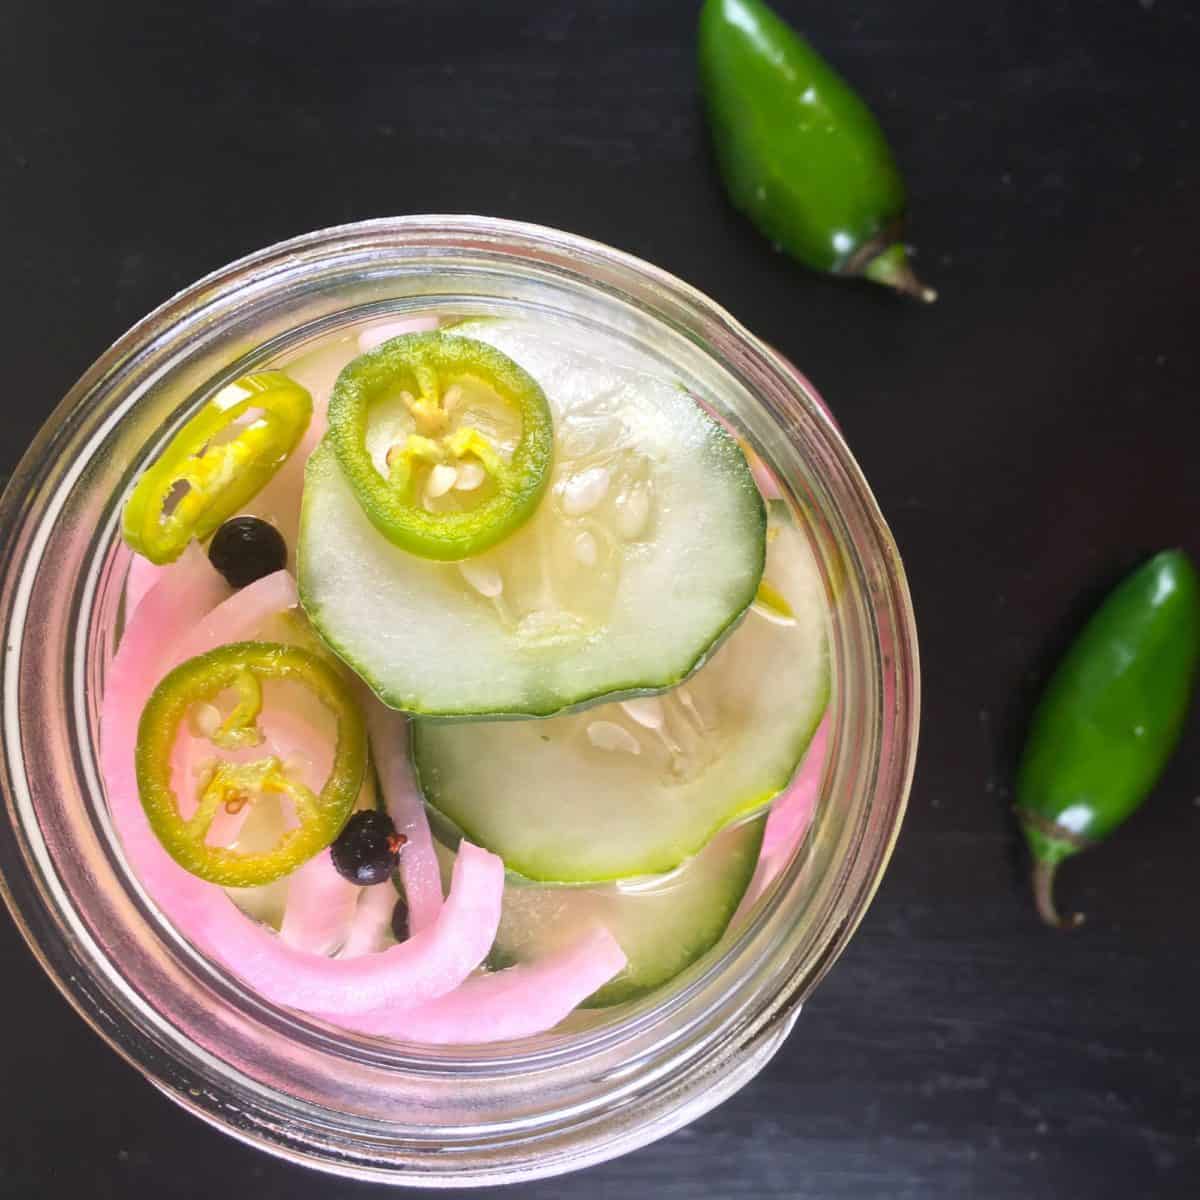 Old fashioned pickles and onions in vinegar